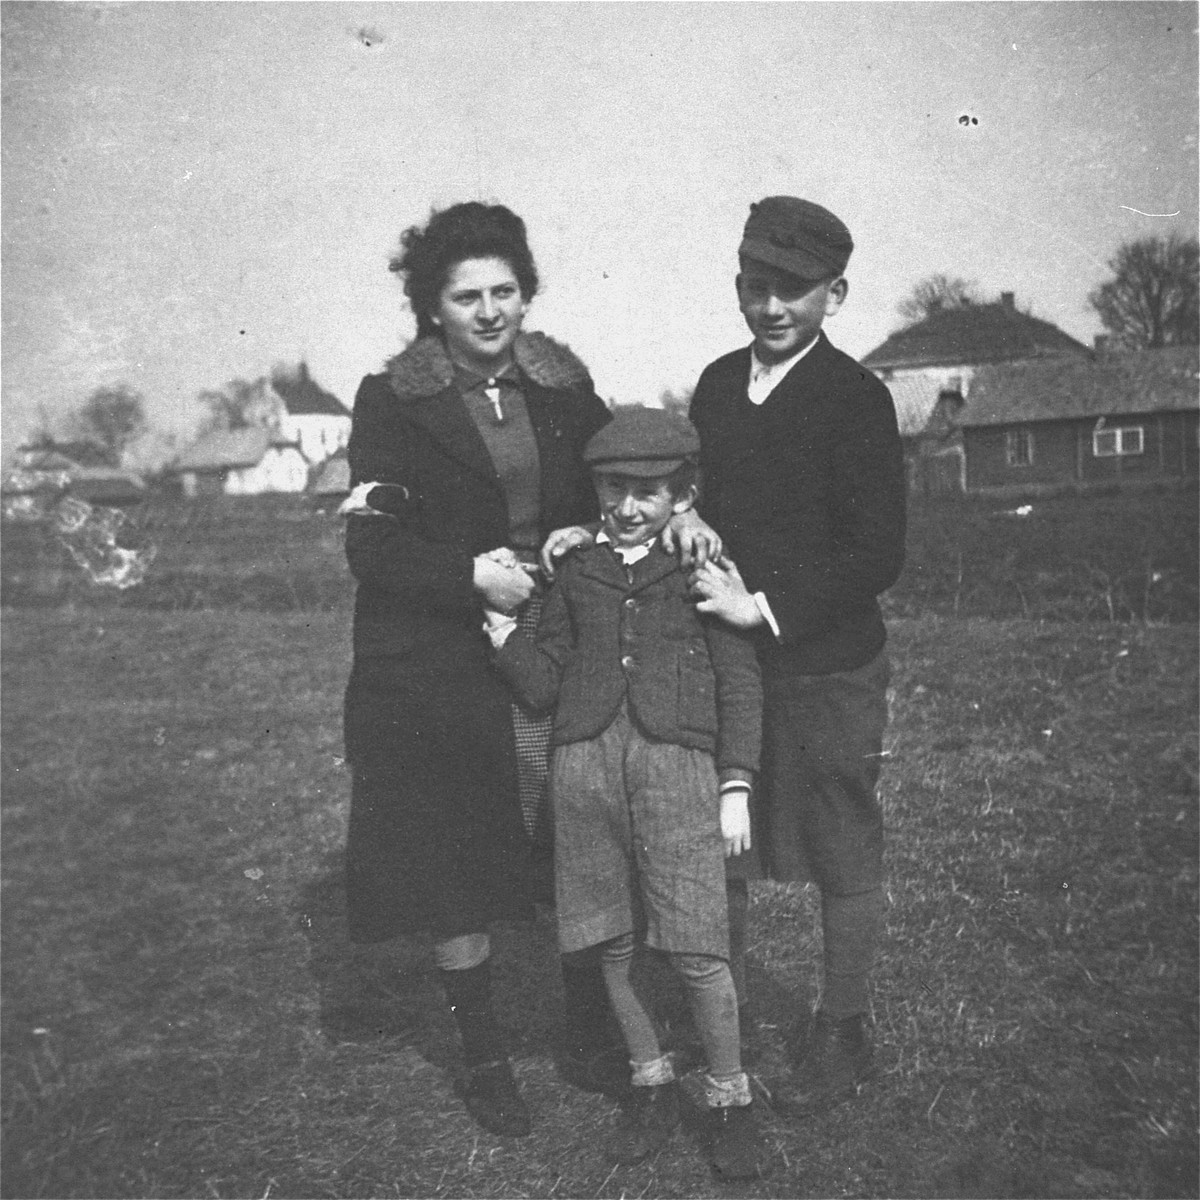 Three Jewish siblings pose outside in the Kolbuszowa ghetto.

Pictured are Manius, Leon and Niunia Notowicz.